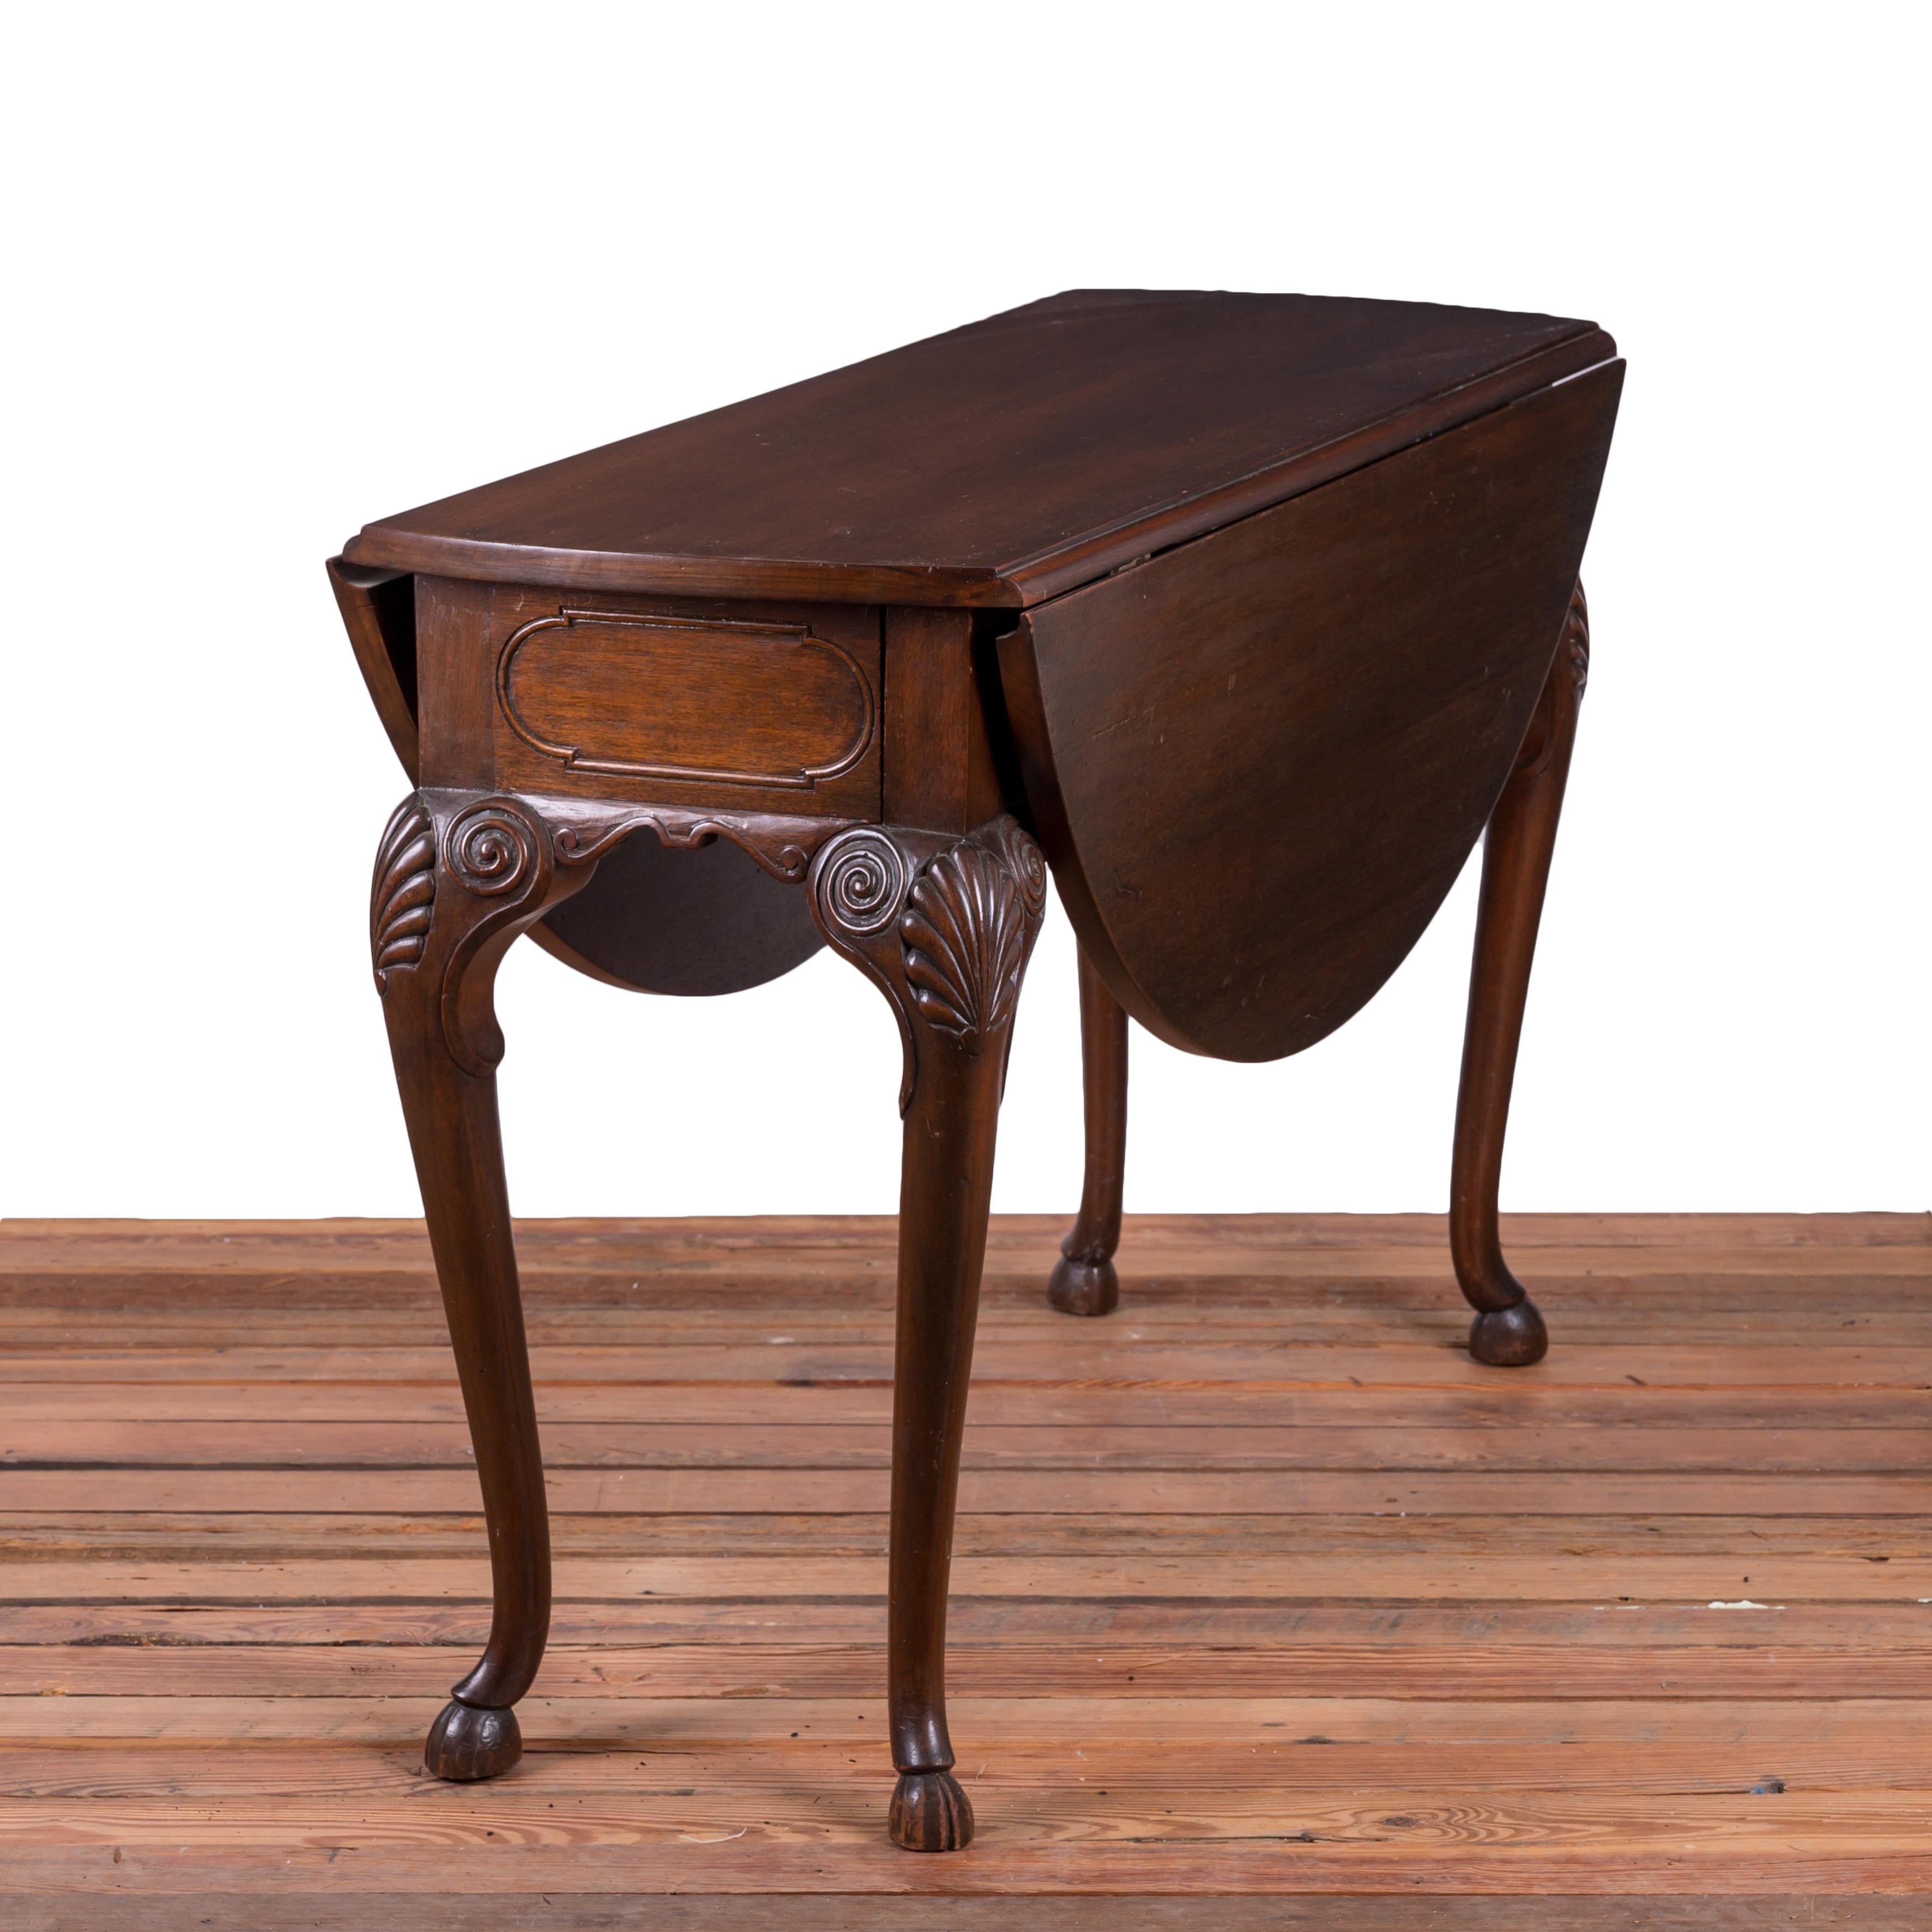 A Irish Georgian style red walnut drop leaf table, late 19th century.

Round top with one gate leg and one bracket support.  A cartouche carved frieze over shell carved cabriole legs with hoof feet.

44 inches wide by 17 ¼ inches deep by 29 ¼ inches